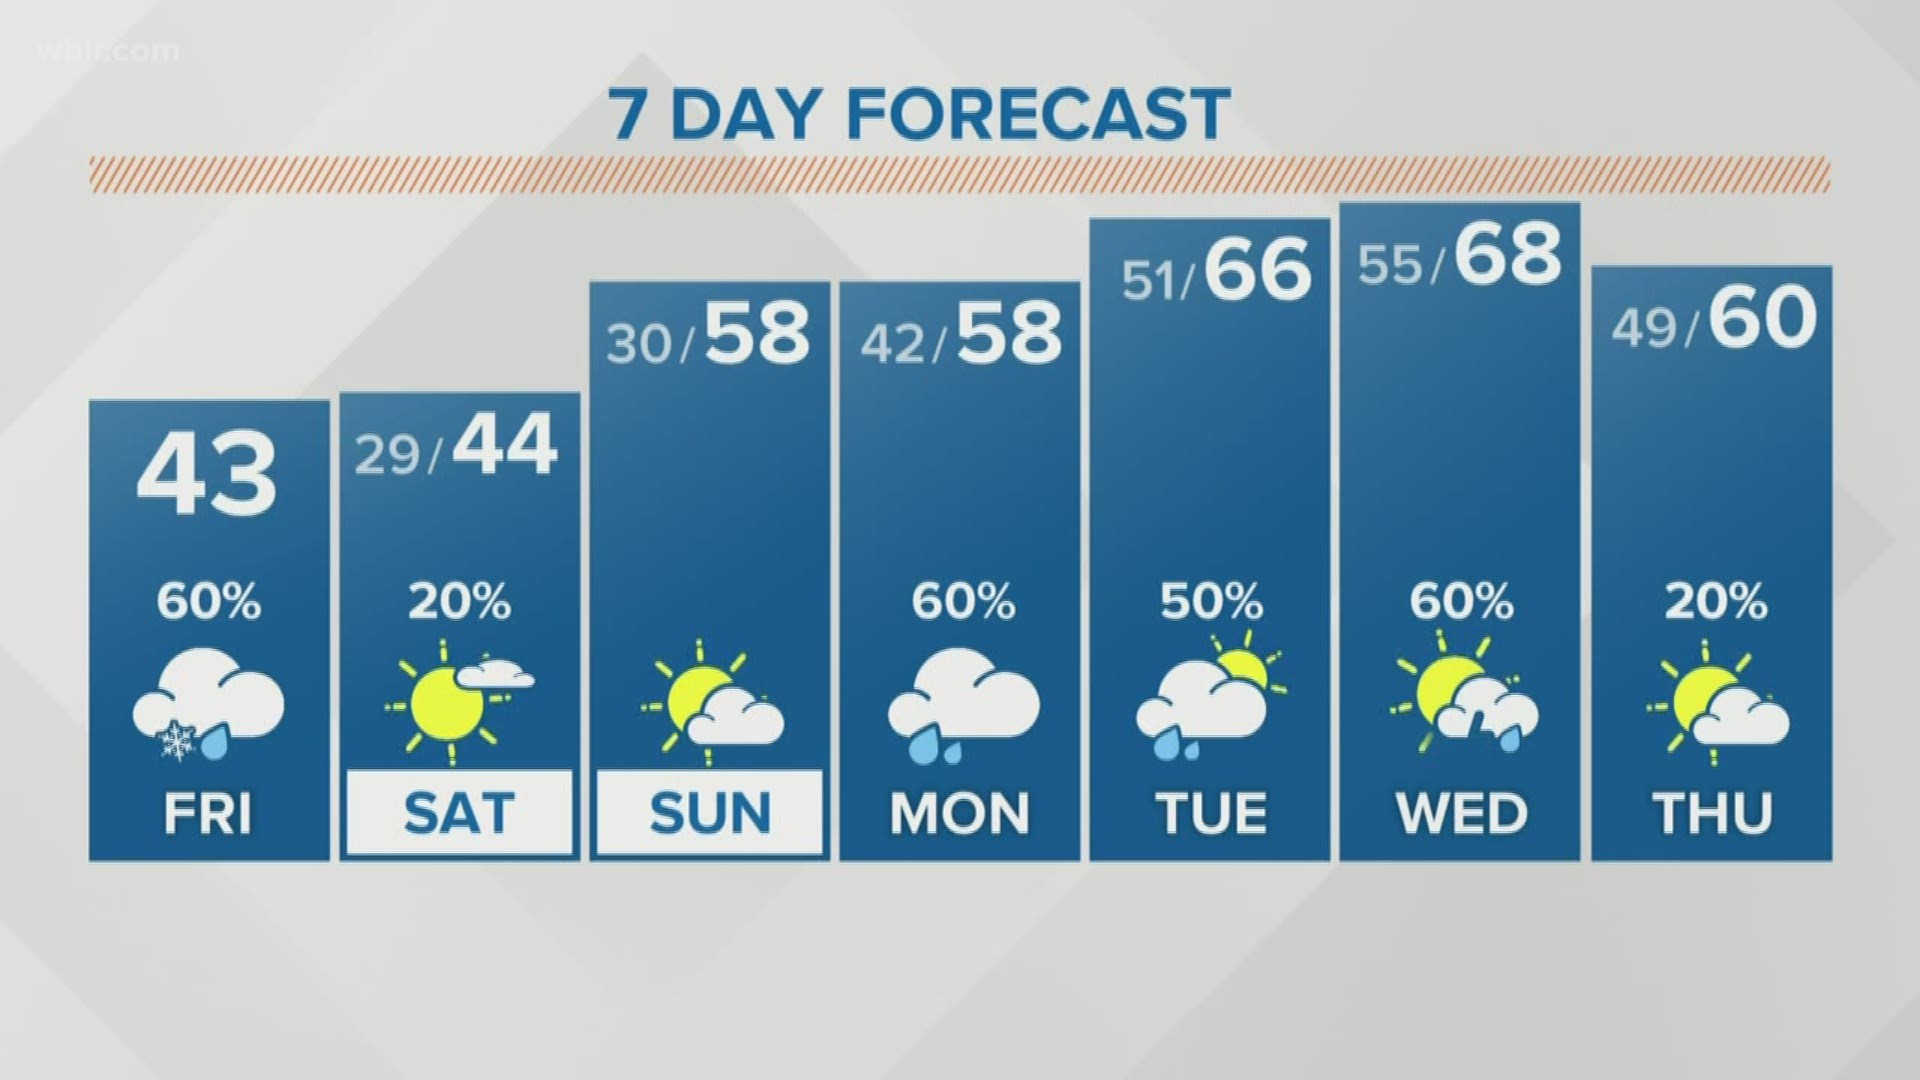 We'll have a chance of wintry weather Friday and Saturday, then spring-like conditions return next week.